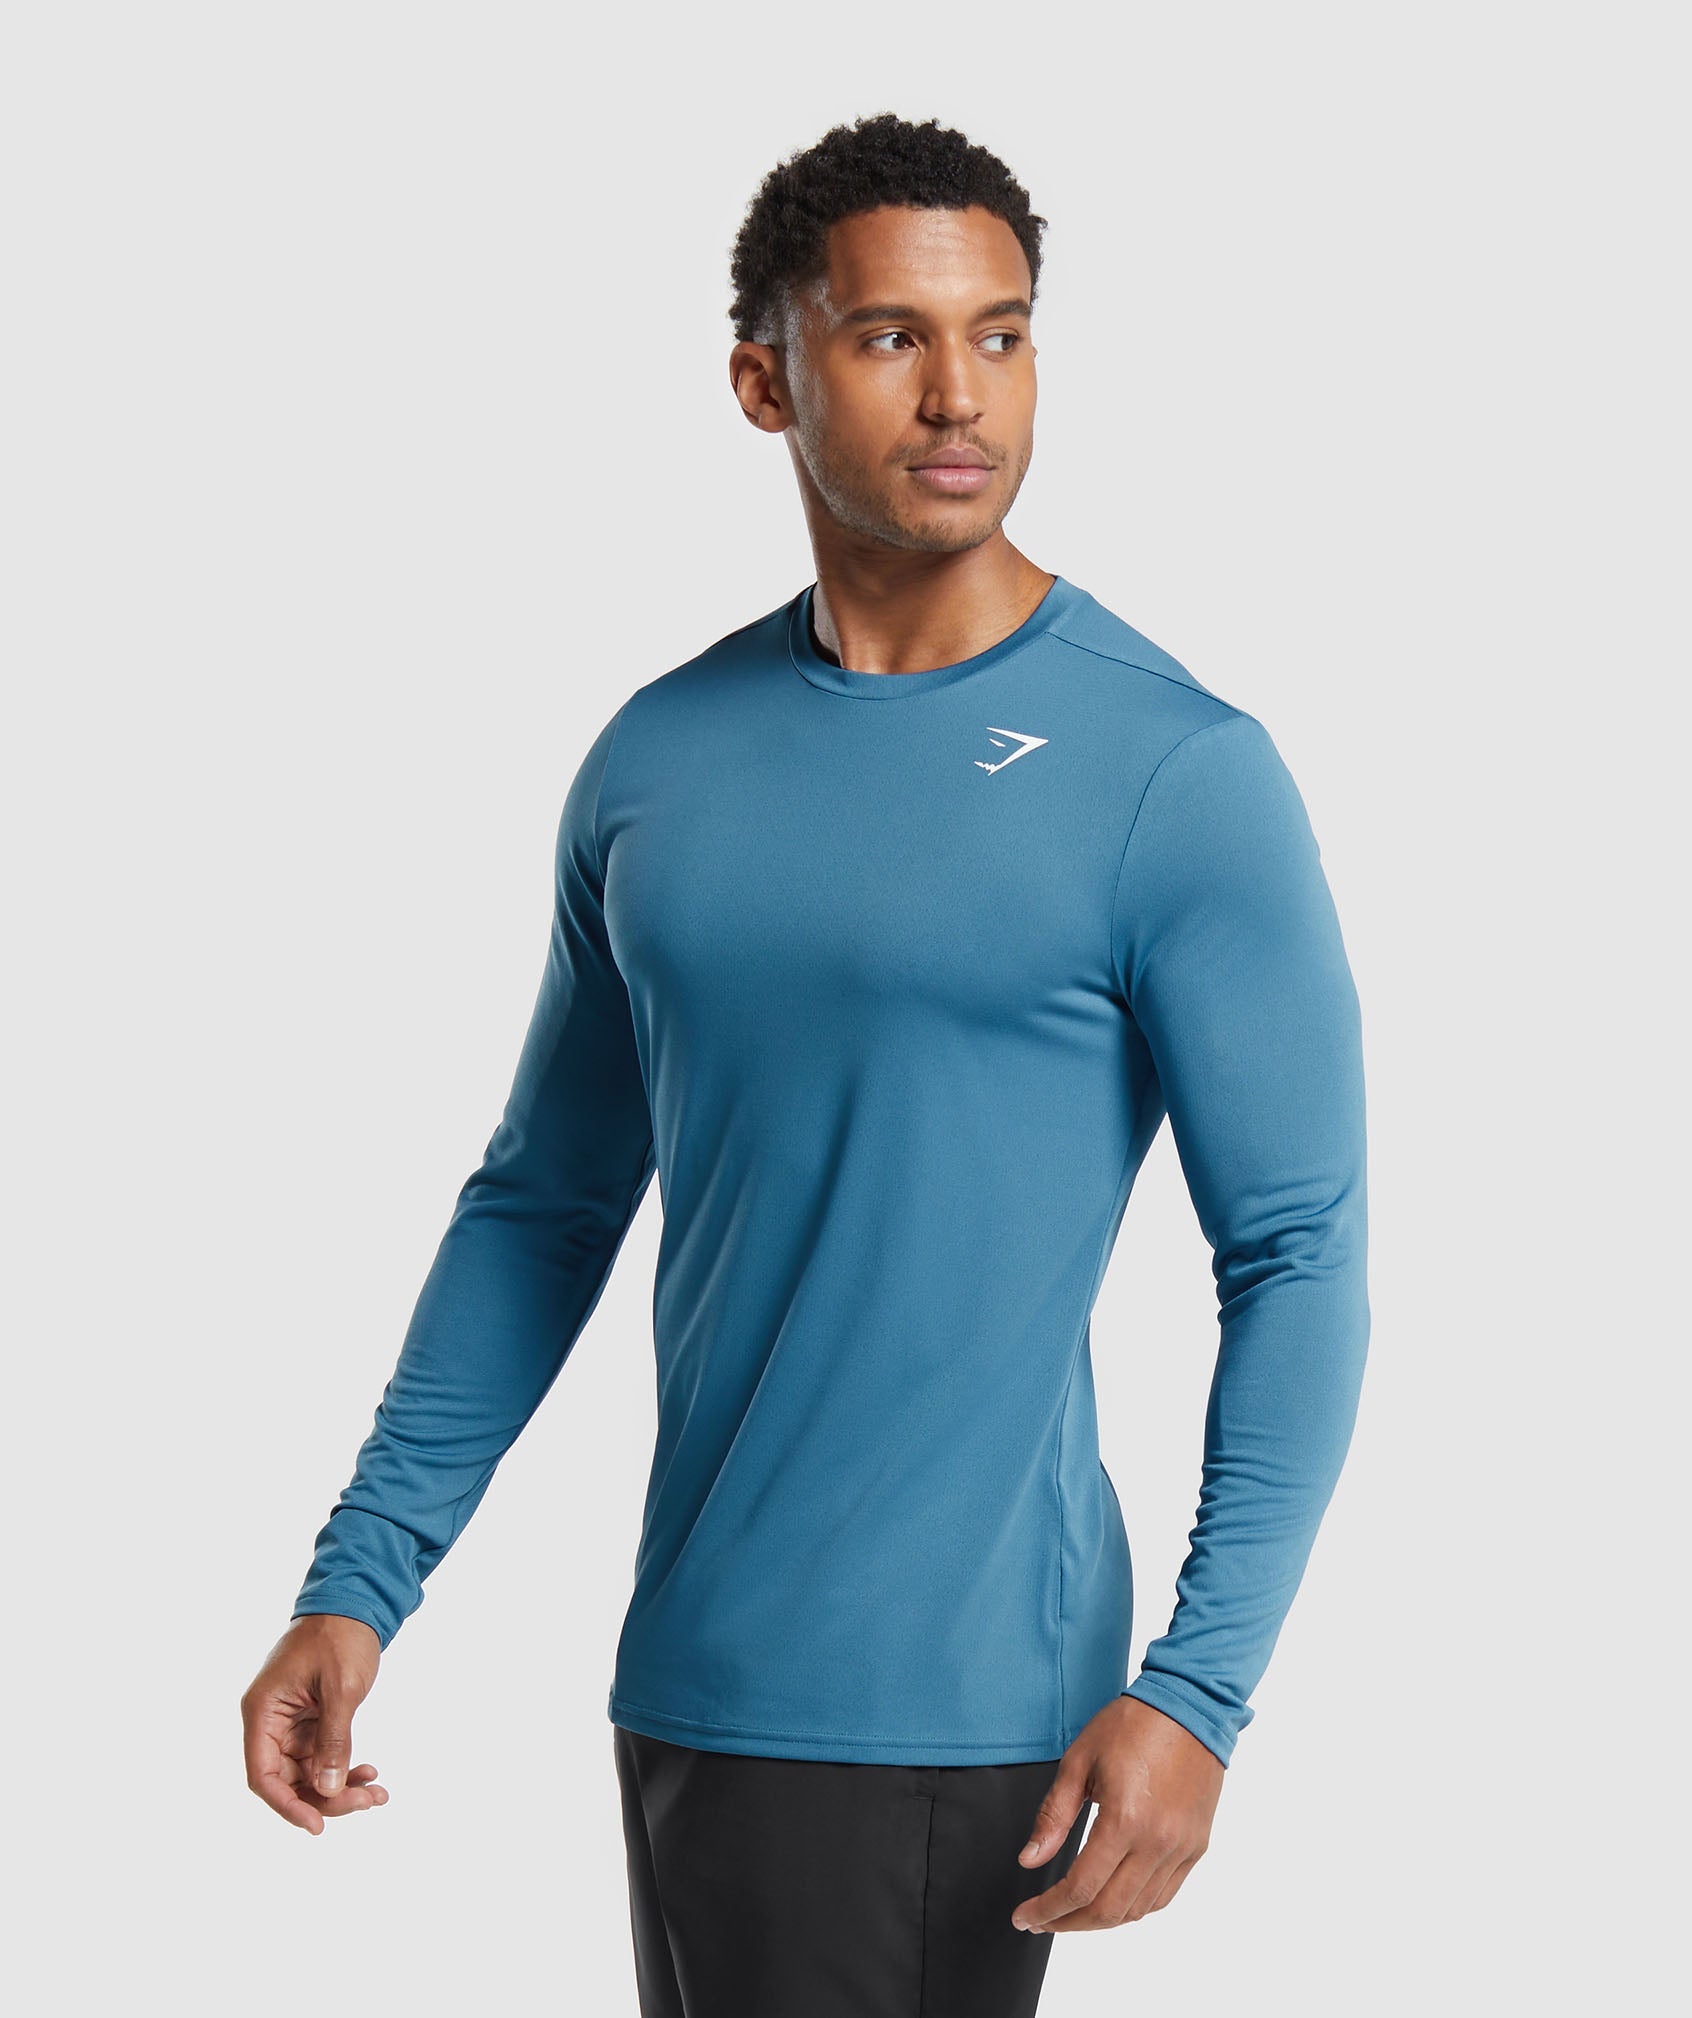 Arrival Long Sleeve T-Shirt in Utility Blue - view 3